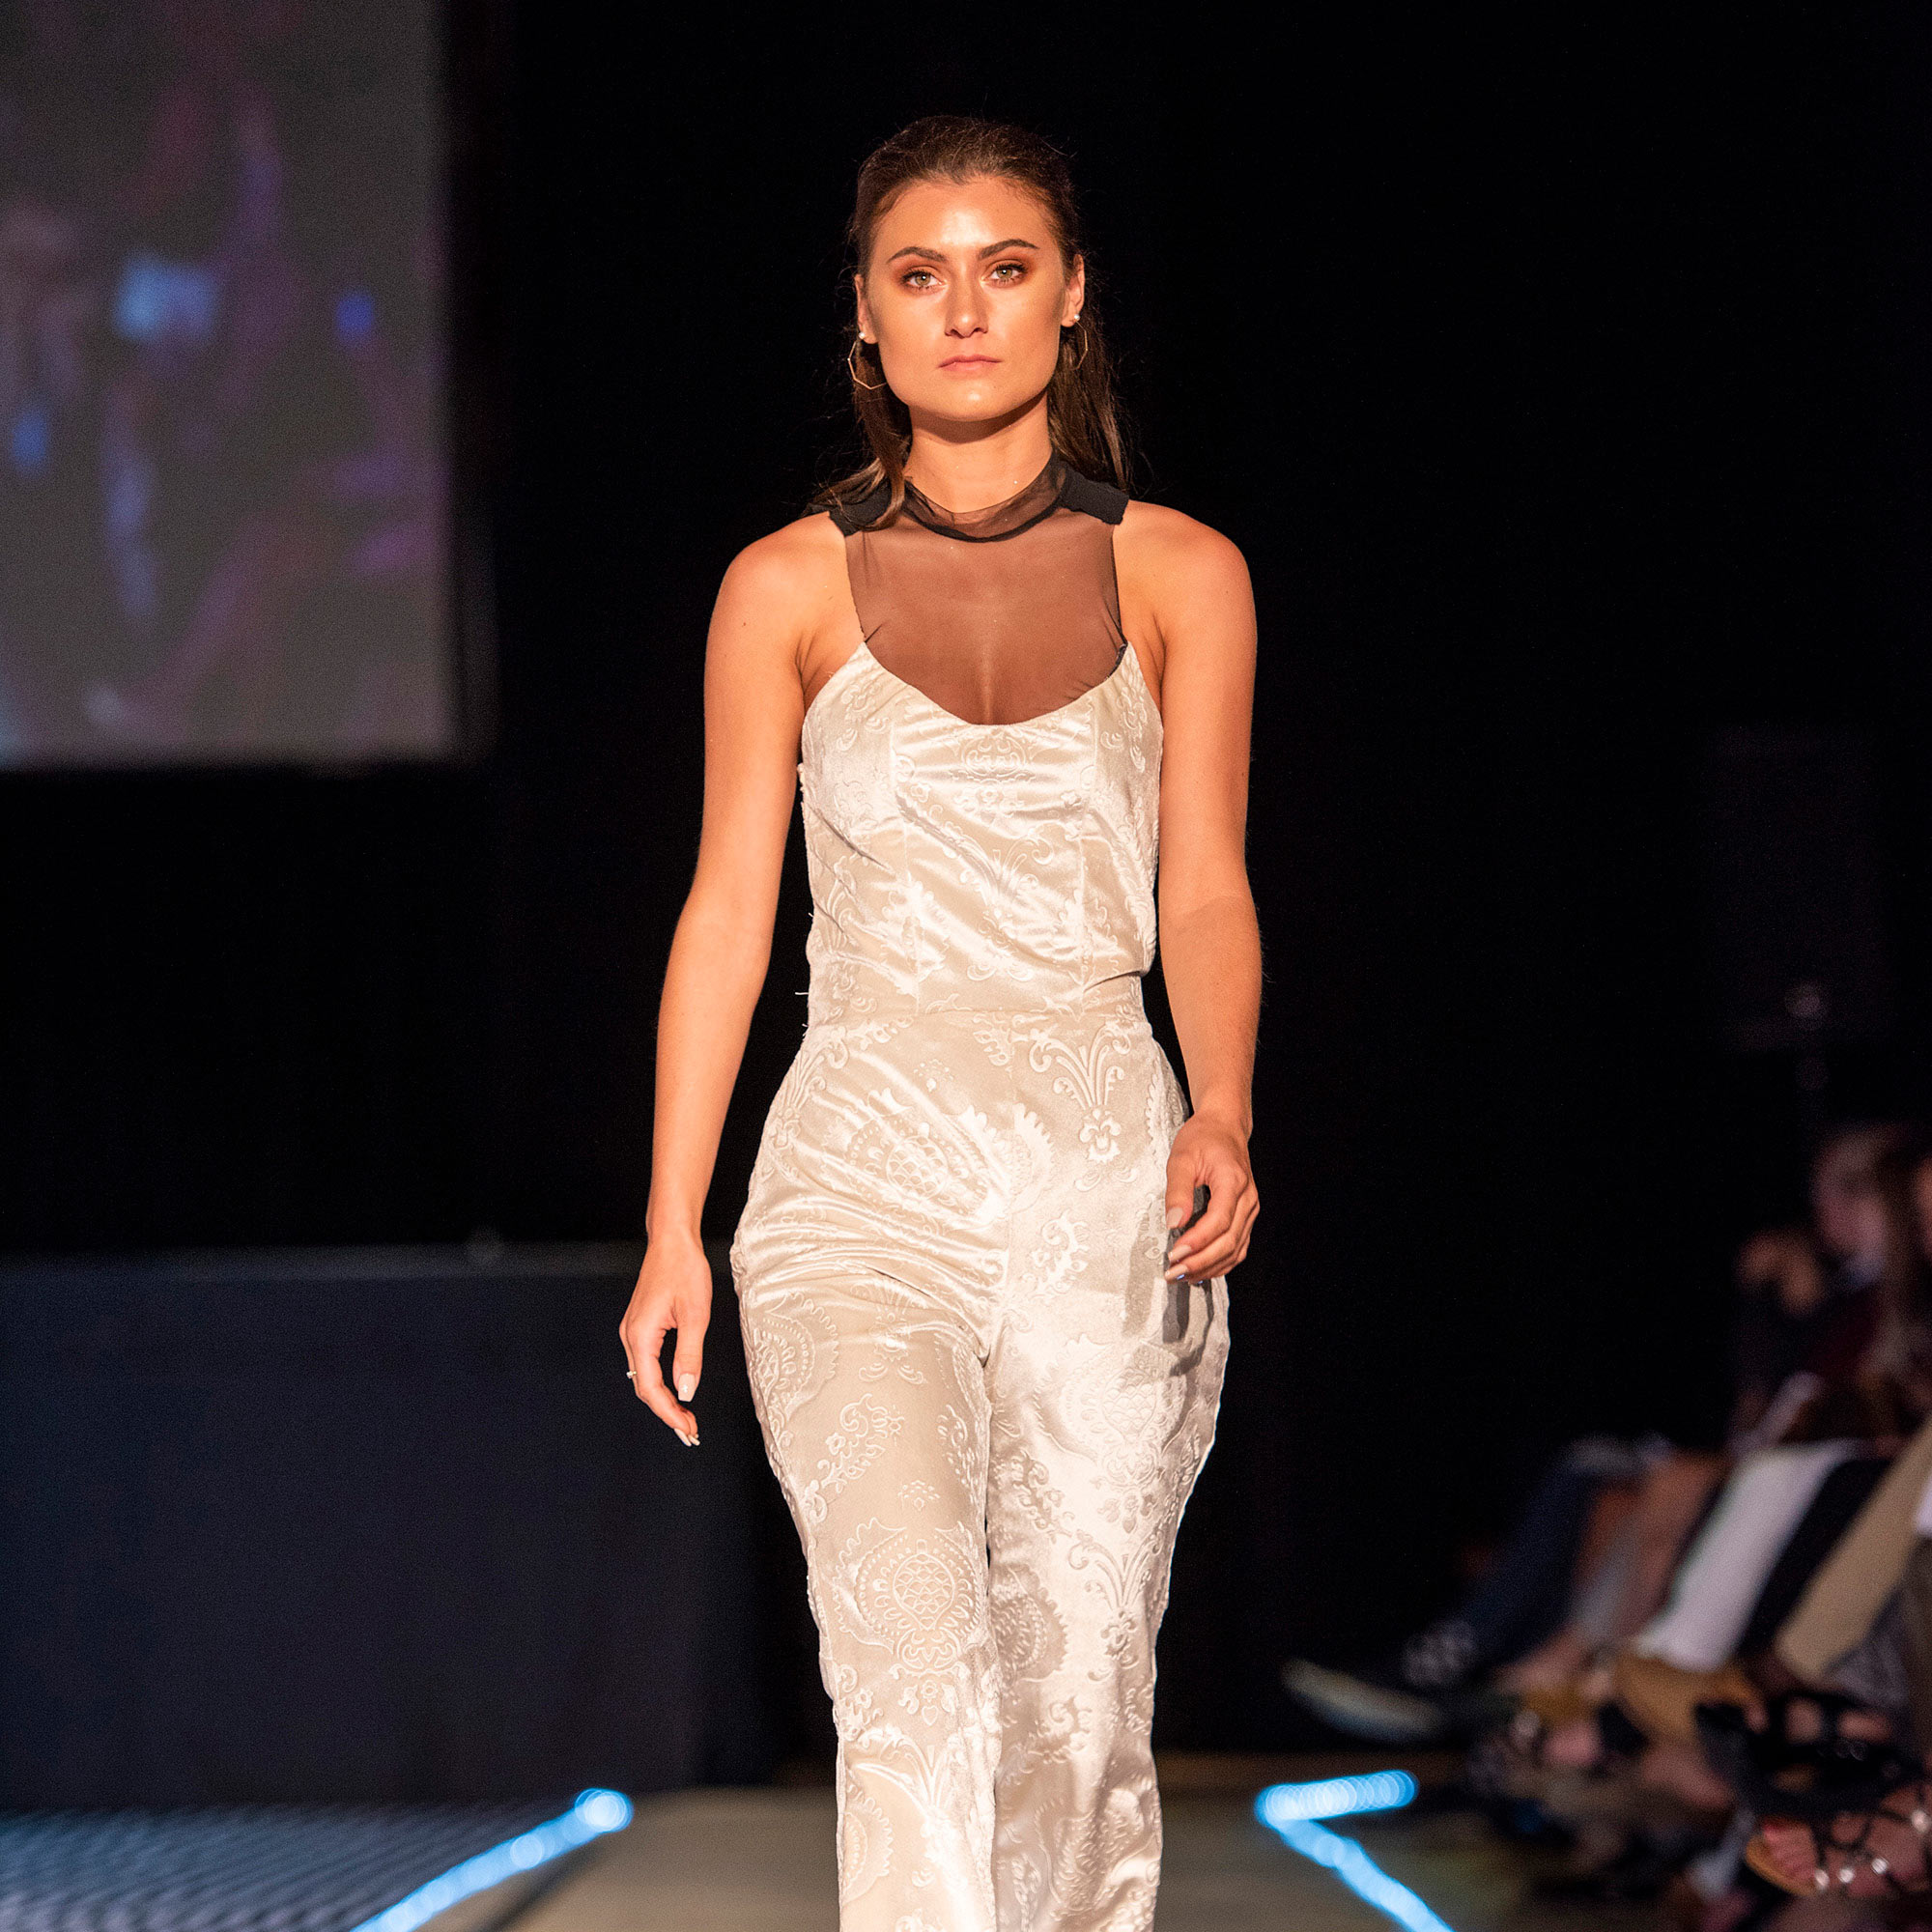 Model walking the runway in a cream colored jumper during The Fashion Event: Mod.